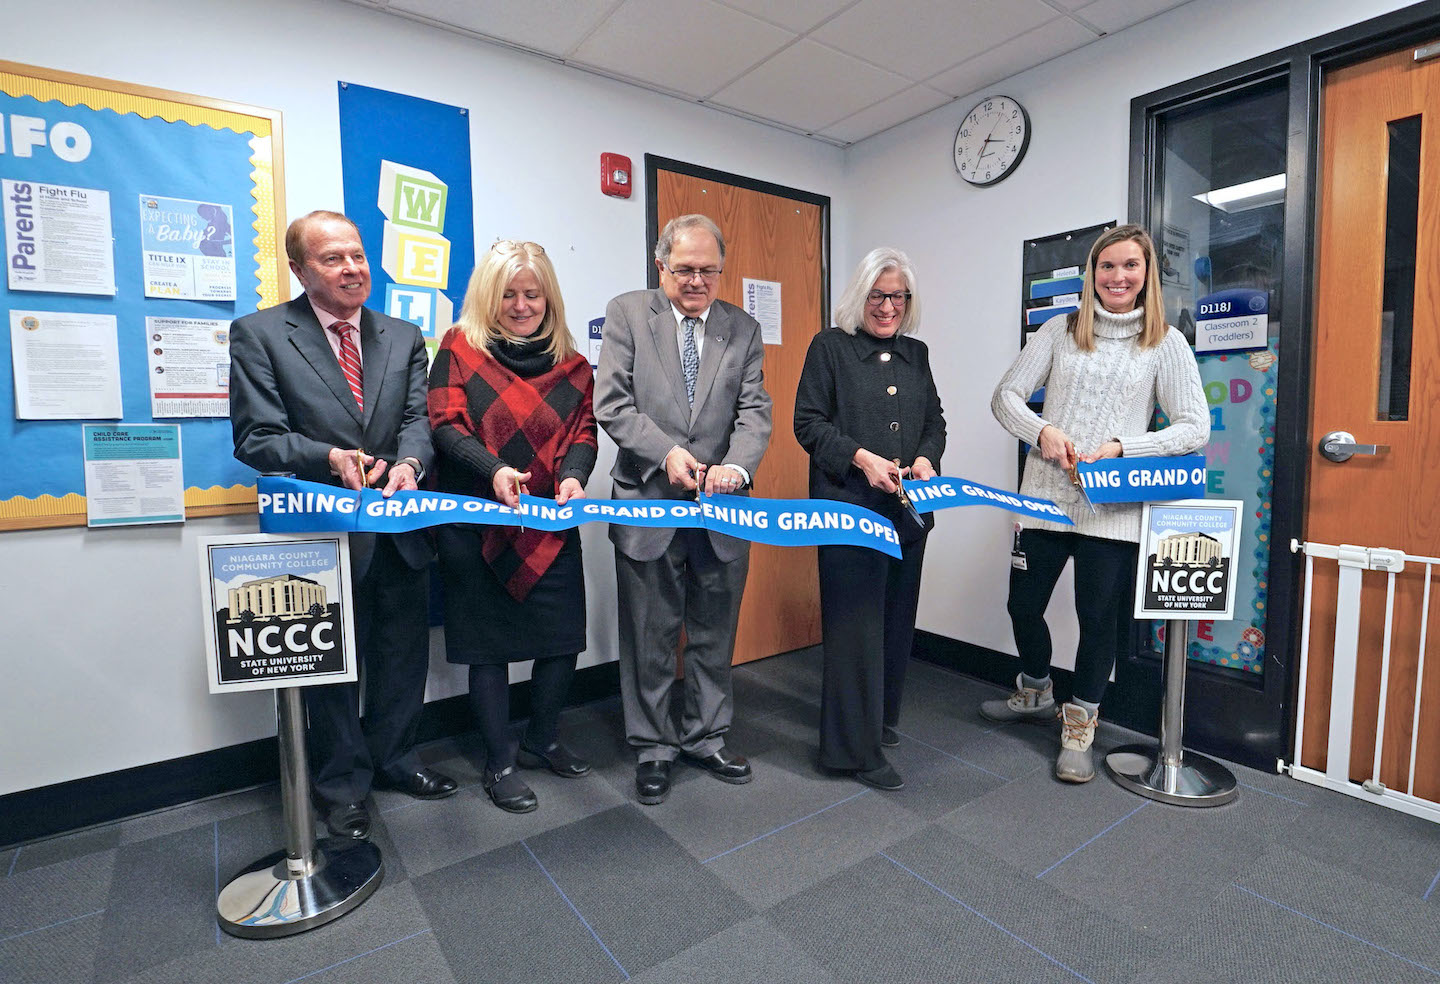 From left: Kevin Clark, NCCC board of trustees member; Gail Tylec, NCCC board of trustees member; Dr. William J. Murabito, NCCC president; Blythe T. Merrill, executive vice president of the John R. Oishei Foundation; and Christine Duquin, director of the NCCC John R. Oishei Child Development Center. (Submitted)